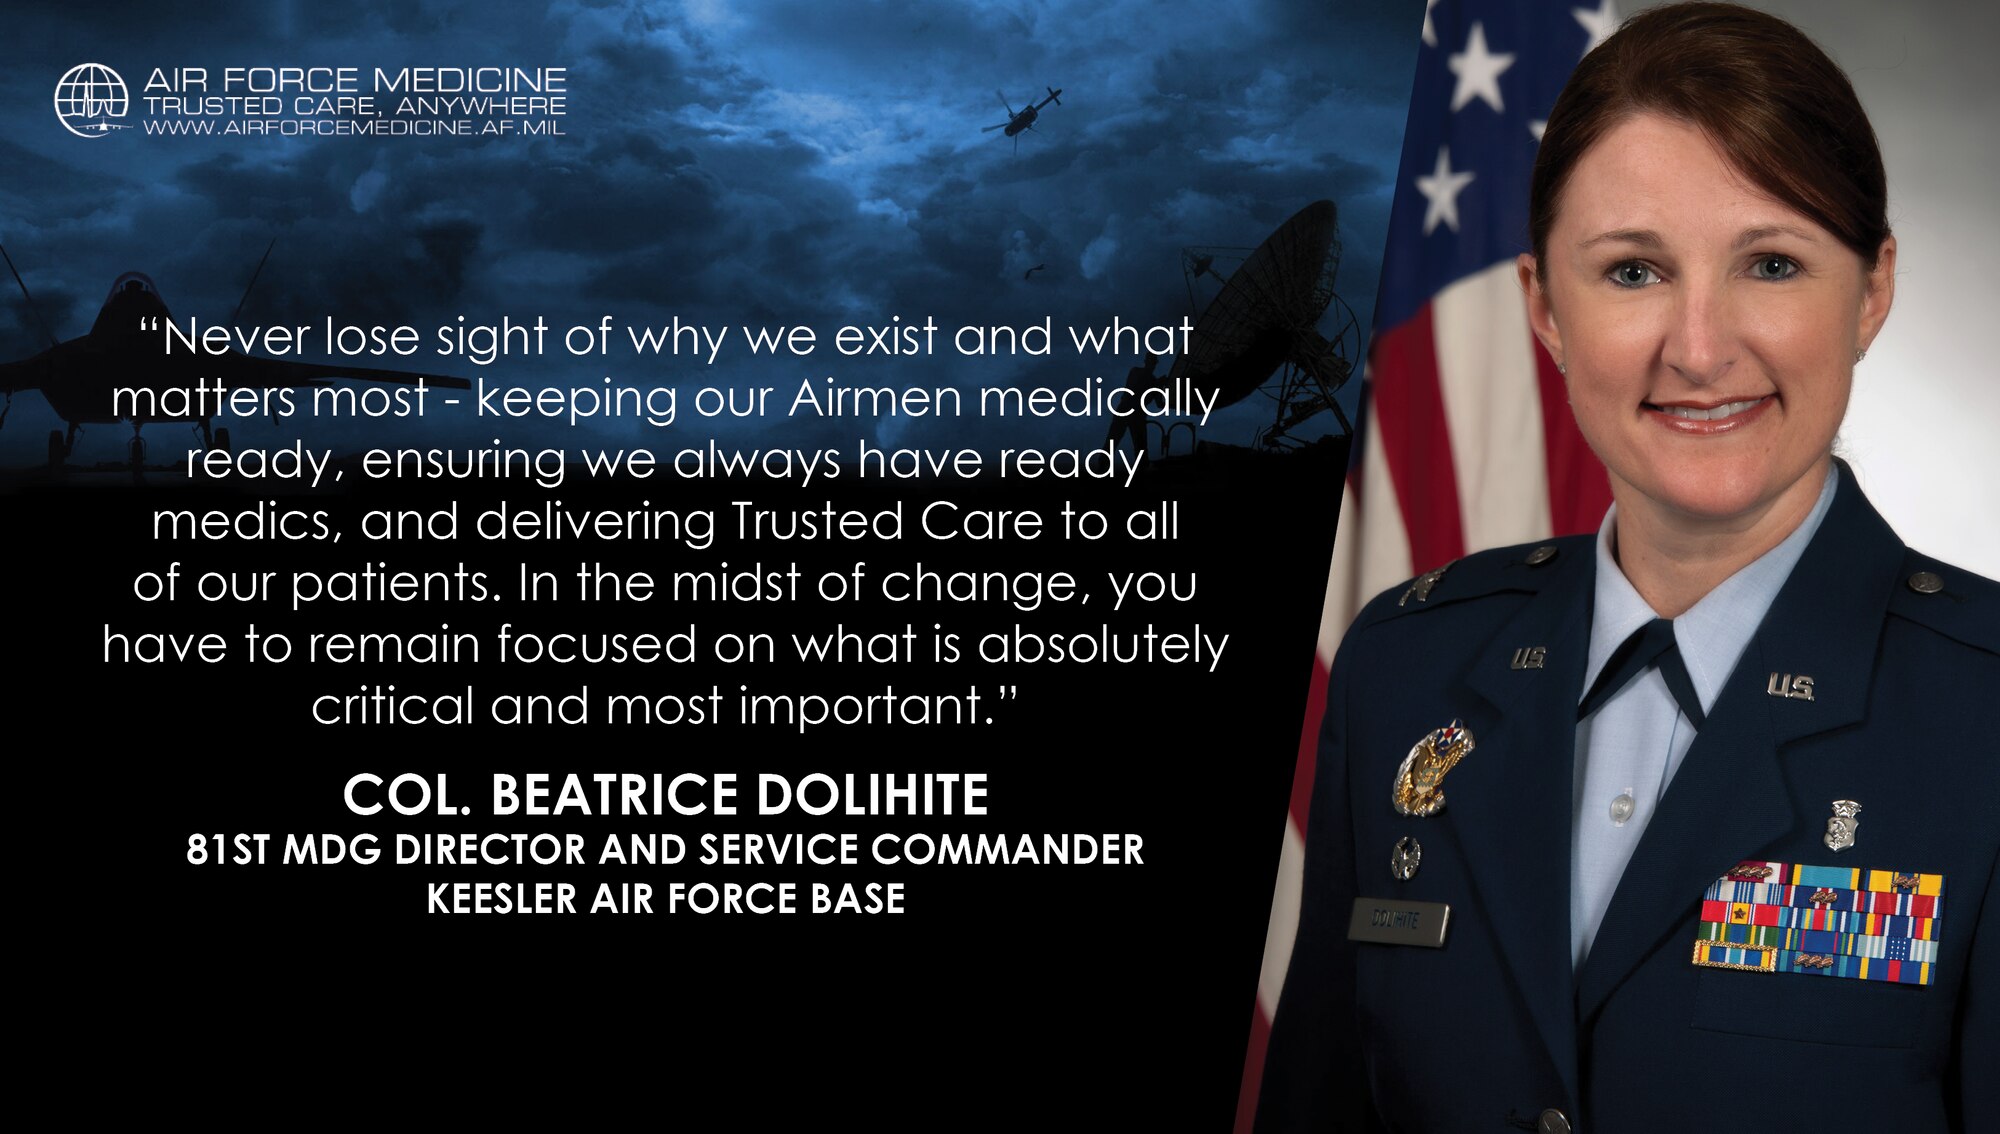 Col. Beatrice Dolihite, 81st Medical Group director and service commander, Keesler Air Force Base, Mississippi, reflects on her experience as the commander of one of the first military treatment facilities to move to the Defense Health Agency on Oct. 1, 2018. (U.S. Air Force illustration)